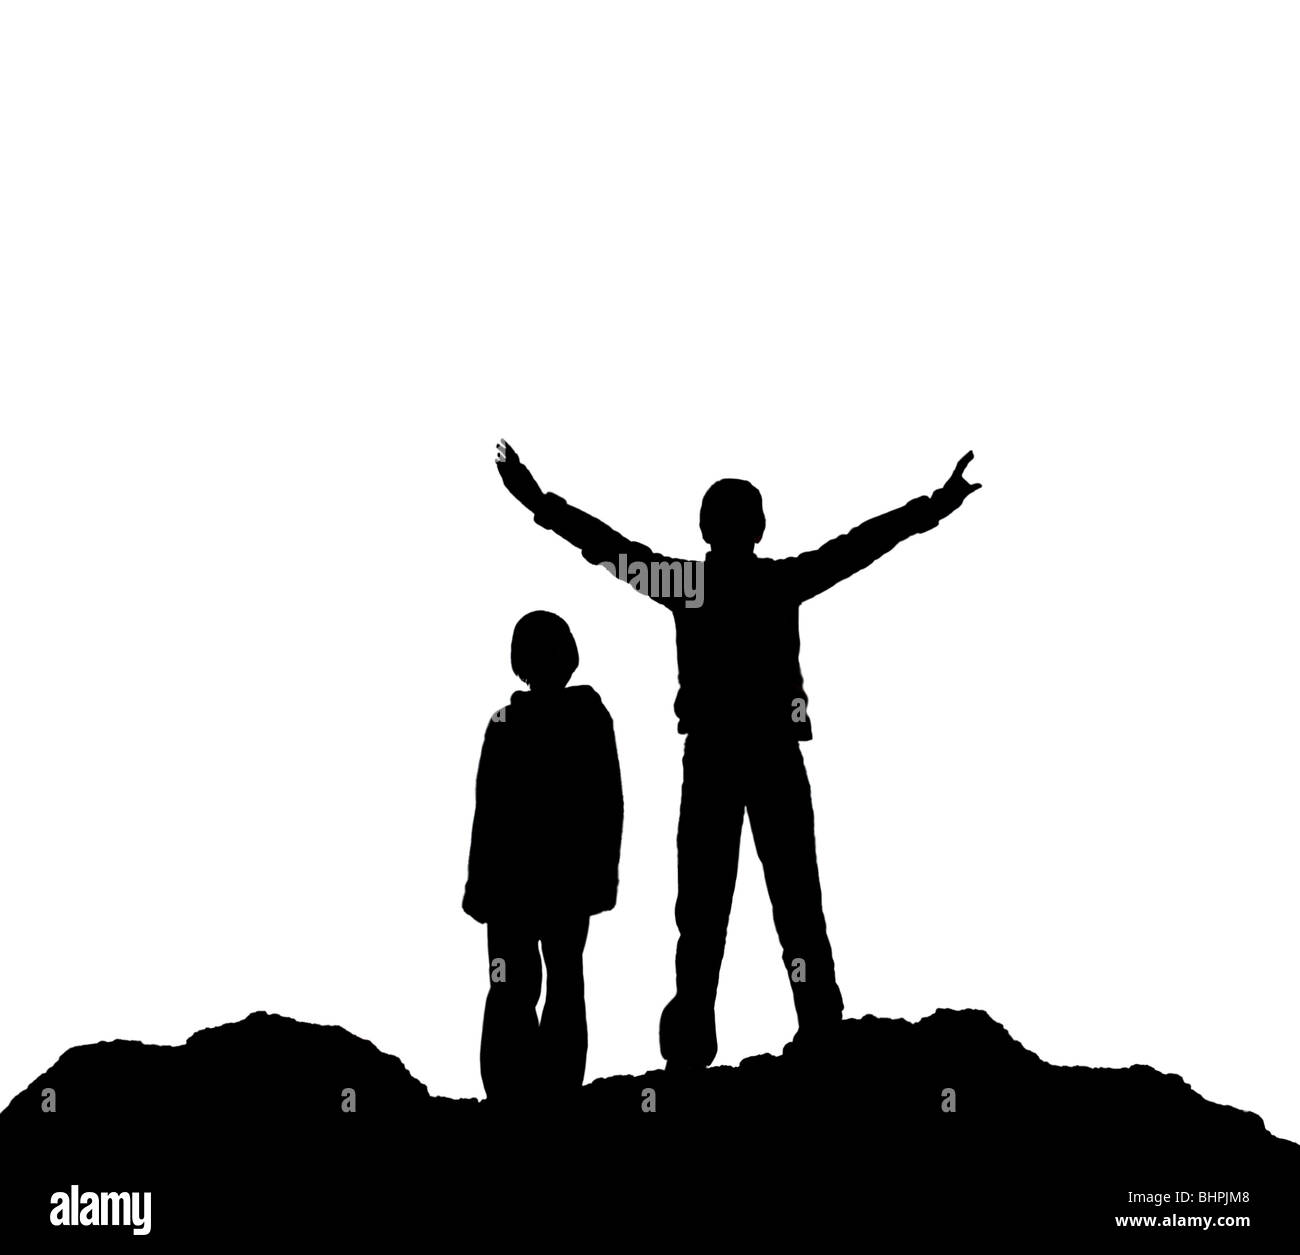 Silhouette of two children, one with arms outstretched,  standing on rough ground against a white background  - Stock Photo